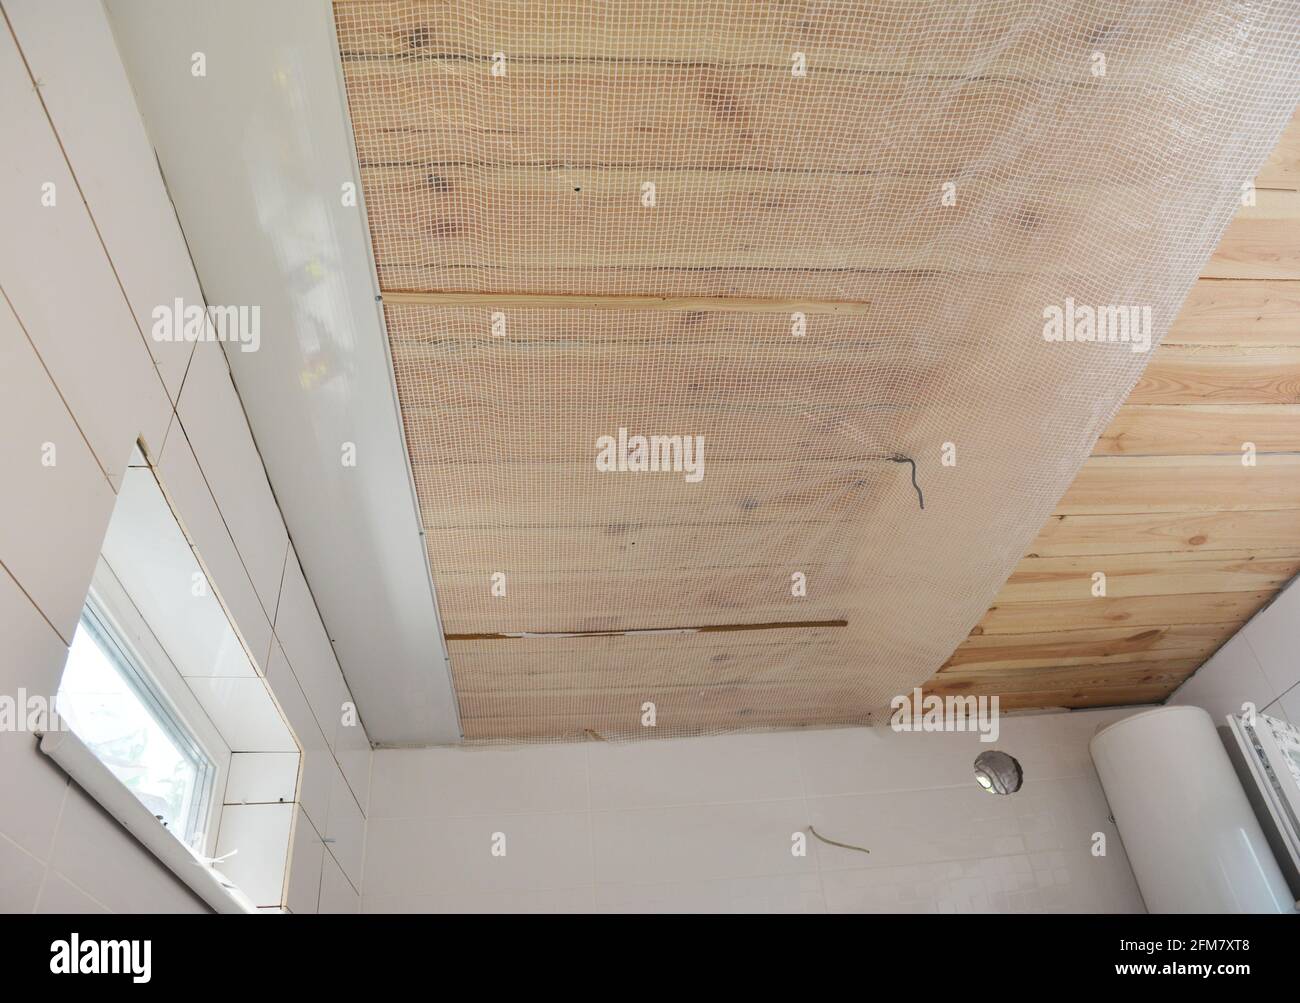 Bathroom renovation: Installing PVC ceiling cladding, plastic ceiling panels over a vapor barrier membrane and planked wood ceiling in a bathroom. Stock Photo